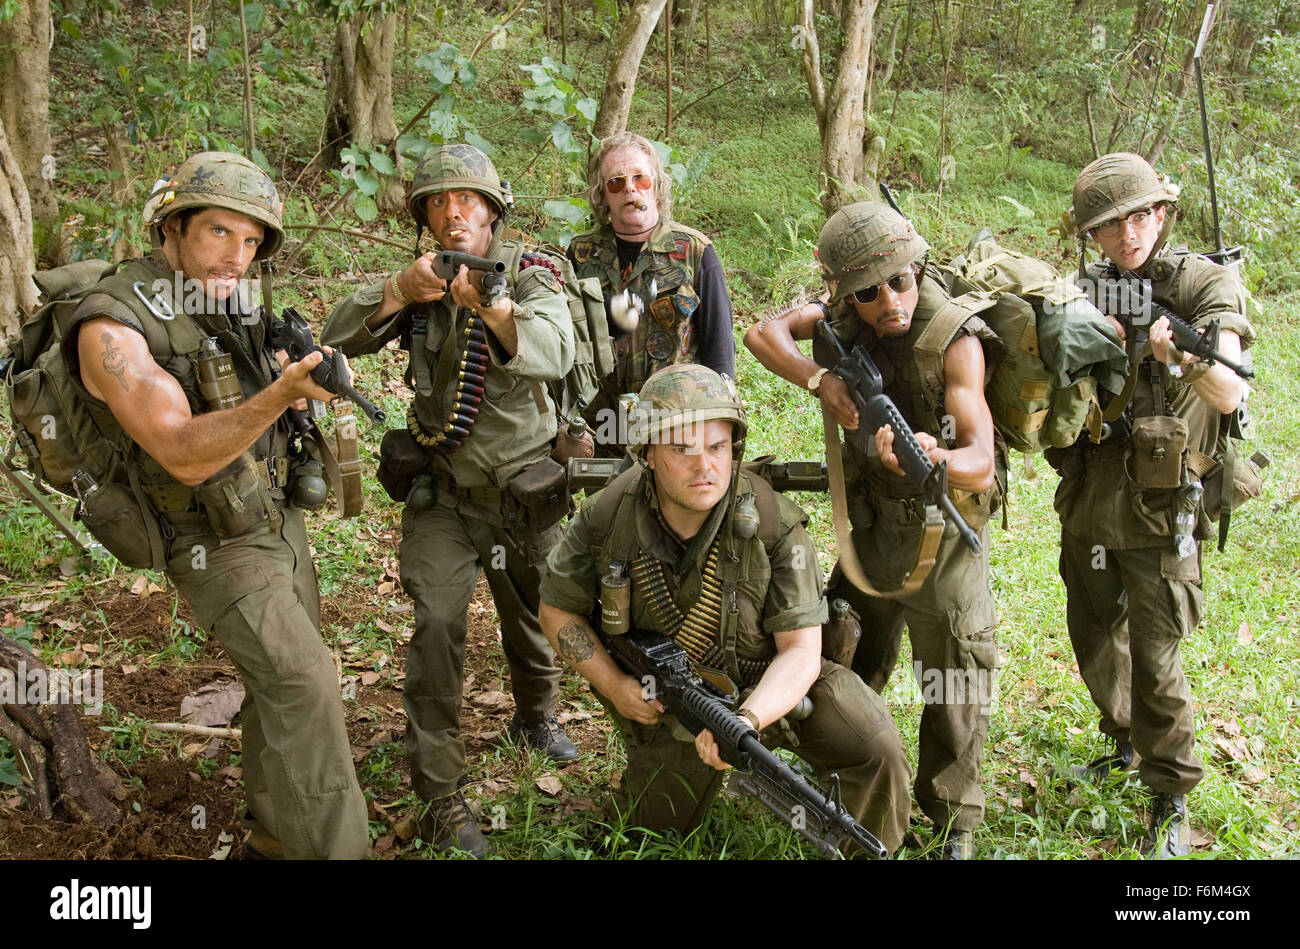 RELEASE DATE: August 15, 2008. MOVIE TITLE: Tropic Thunder. STUDIO: DreamWorks Pictures. PLOT: Through a series of freak occurrences, a group of actors shooting a big-budget war movie are forced to become the soldiers they are portraying. PICTURED: JACK BLACK as Jeff Portnoy, BEN STILLER as Tugg Speedman, ROBERT DOWNEY JR. as Kirk Lazarus, NICK NOLTE as Four Leaf Tayback. Stock Photo